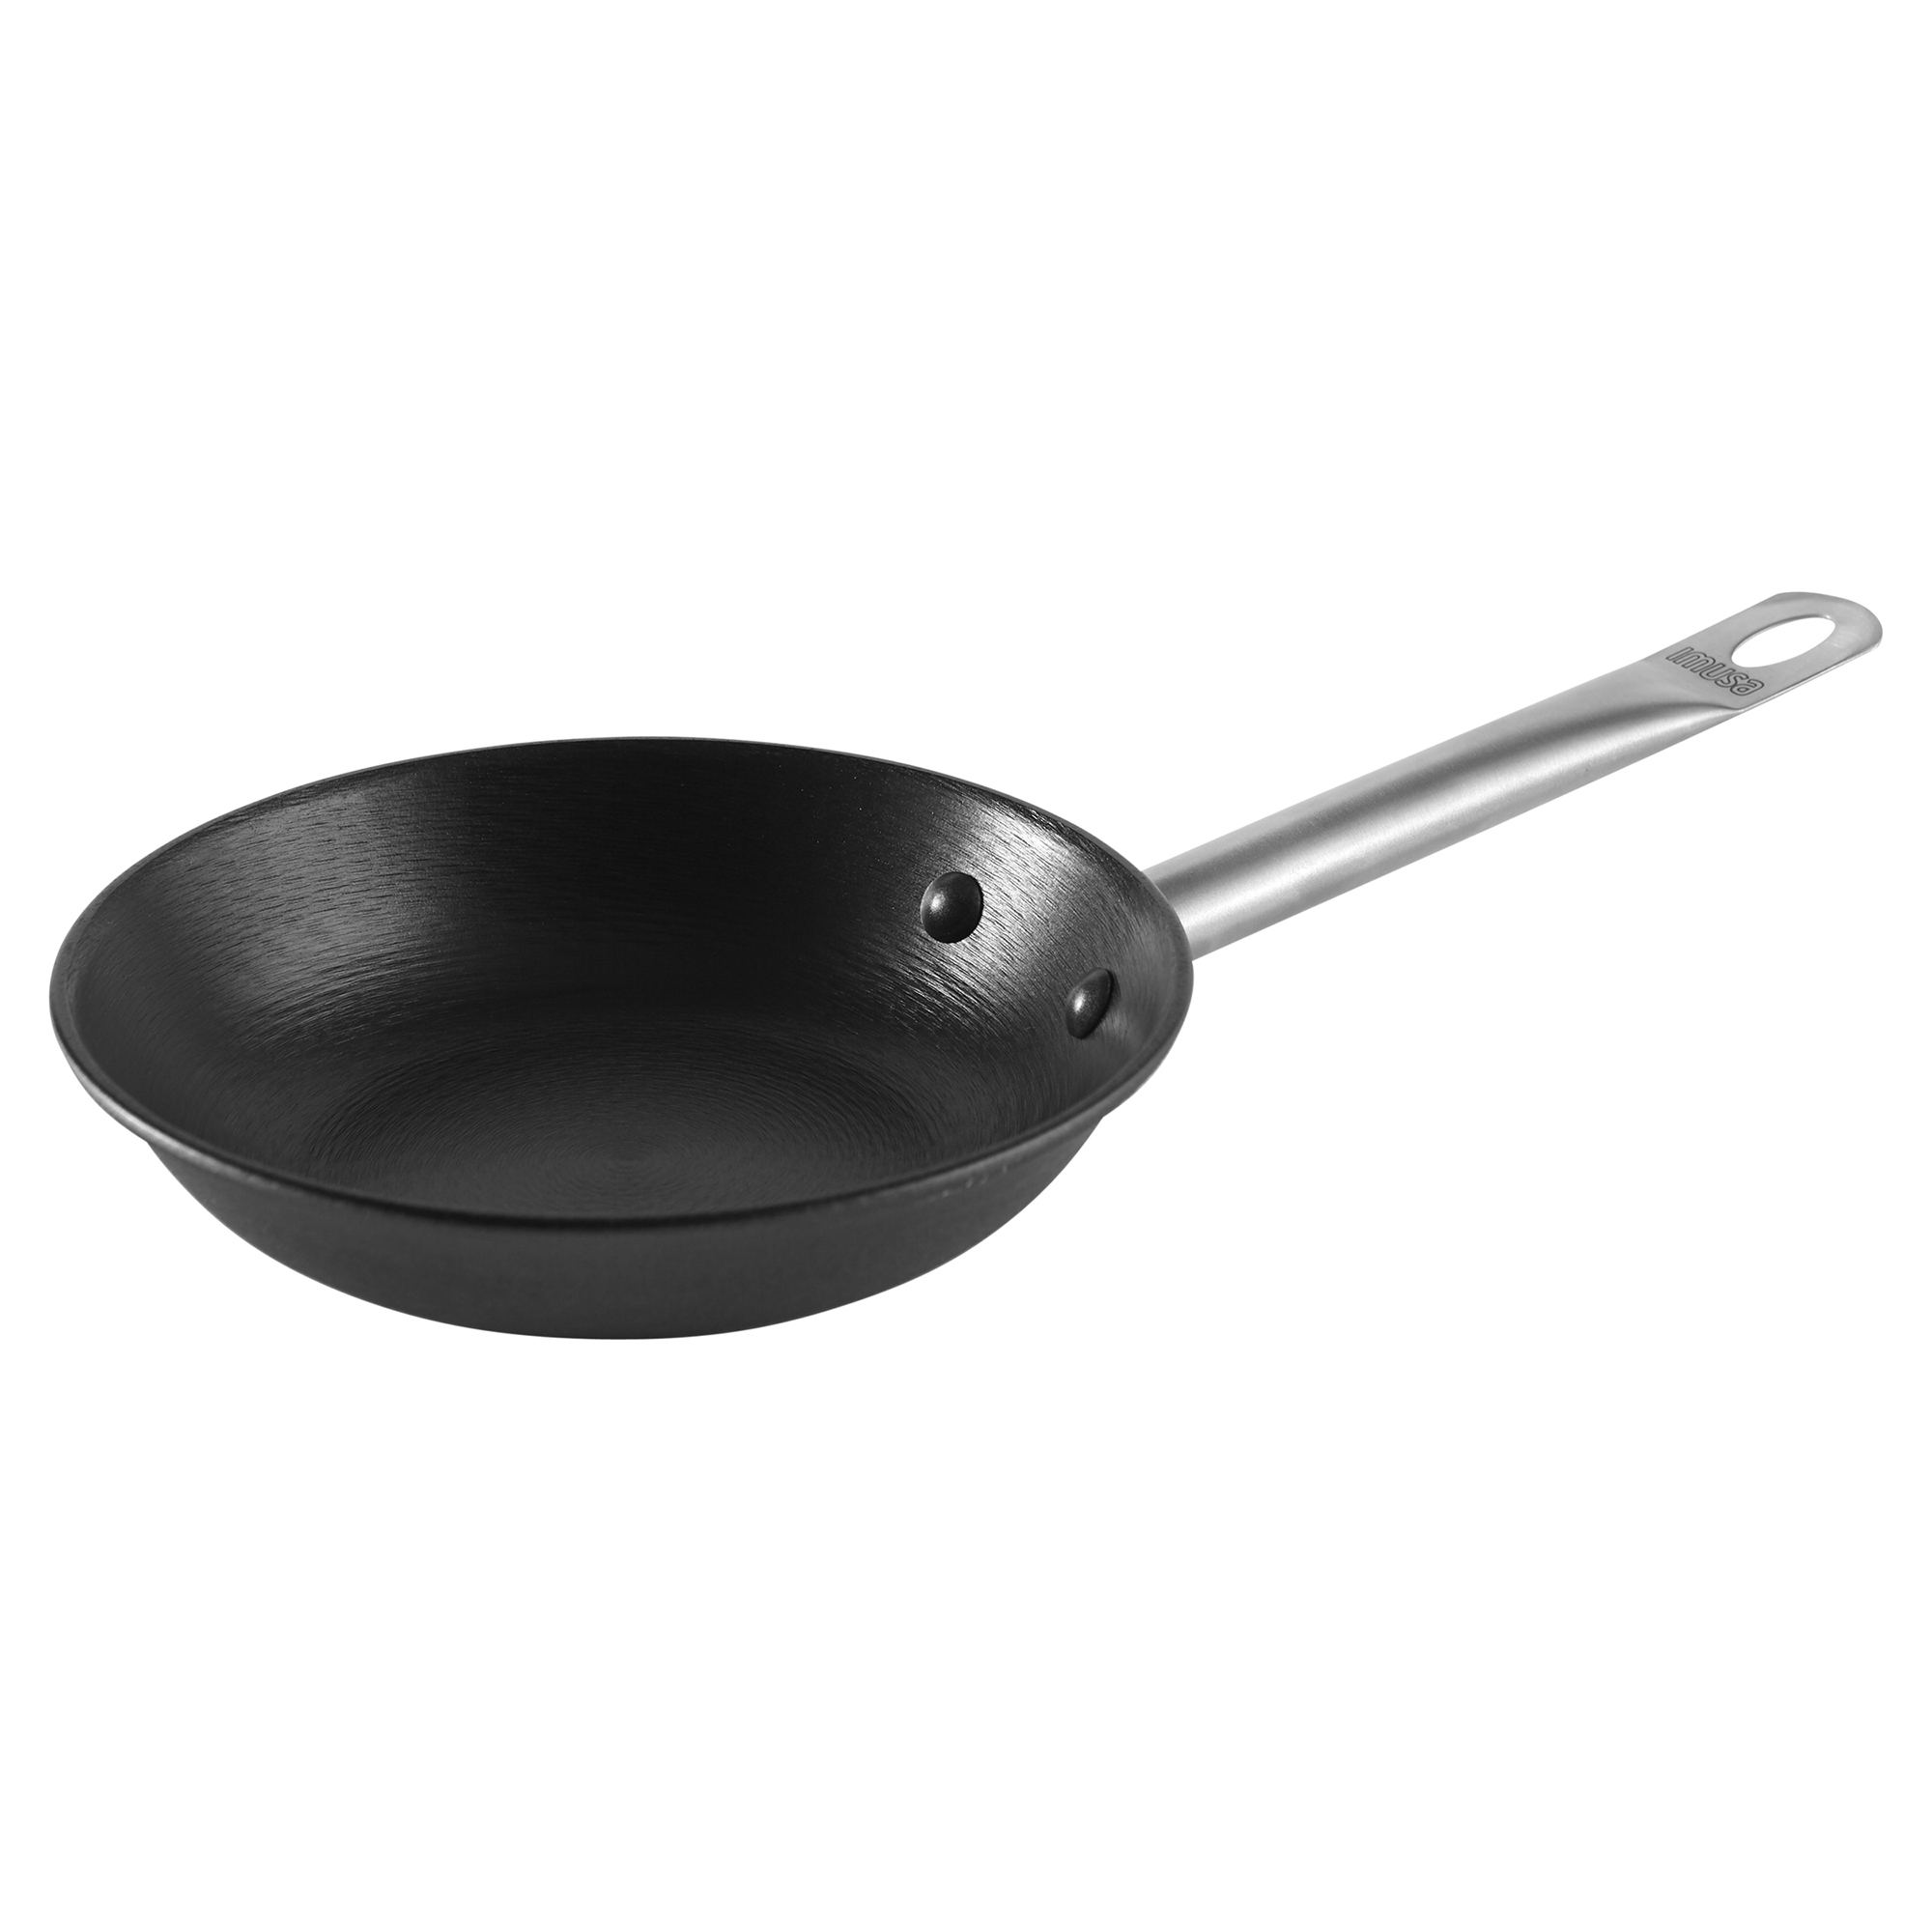 IMUSA Carbon Steel Oval Comal 17 in